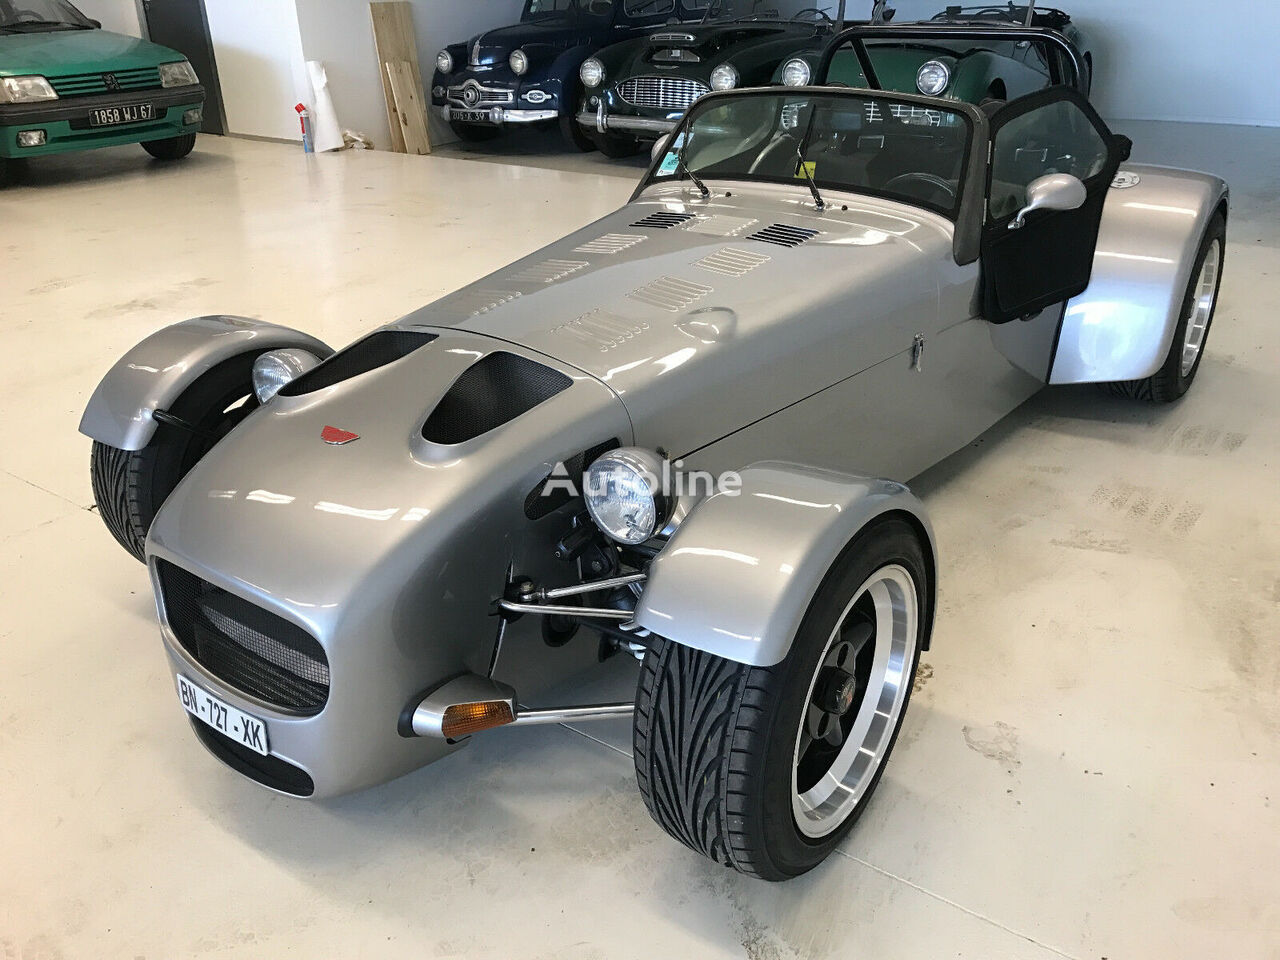 Ford Donkervoort D8 Cabrio